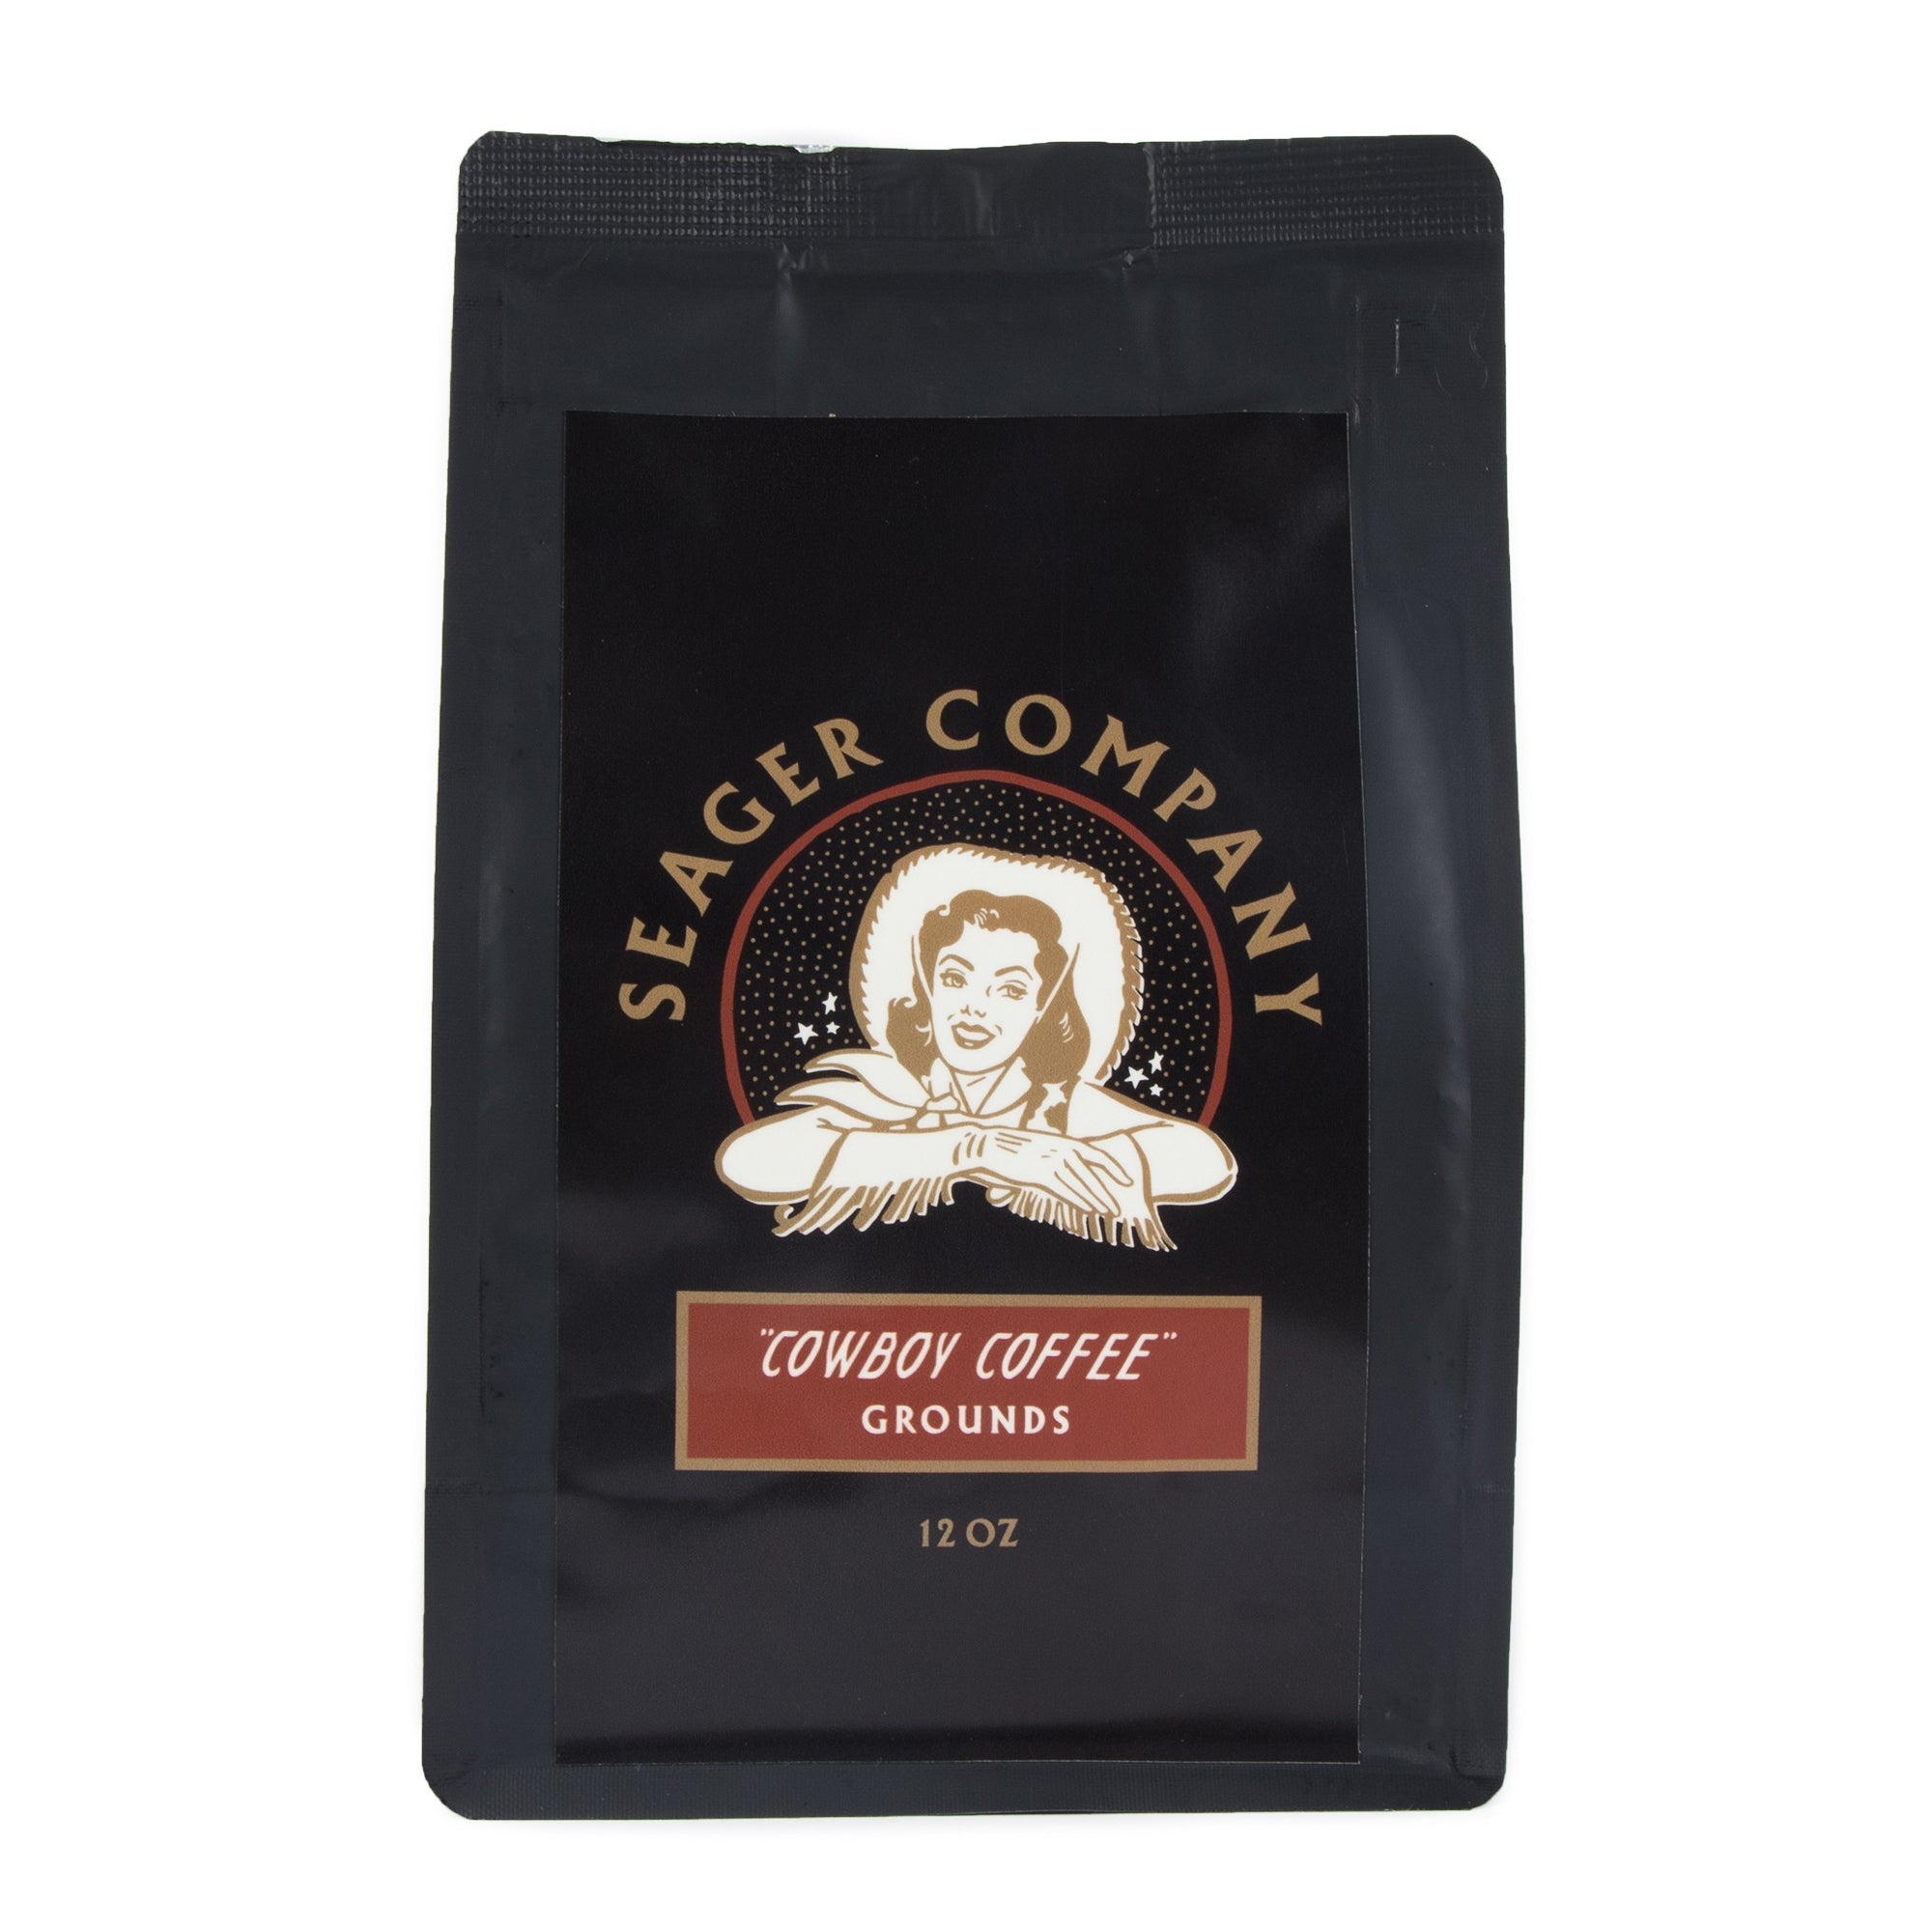 Seager House Blend Coffee (12 oz)